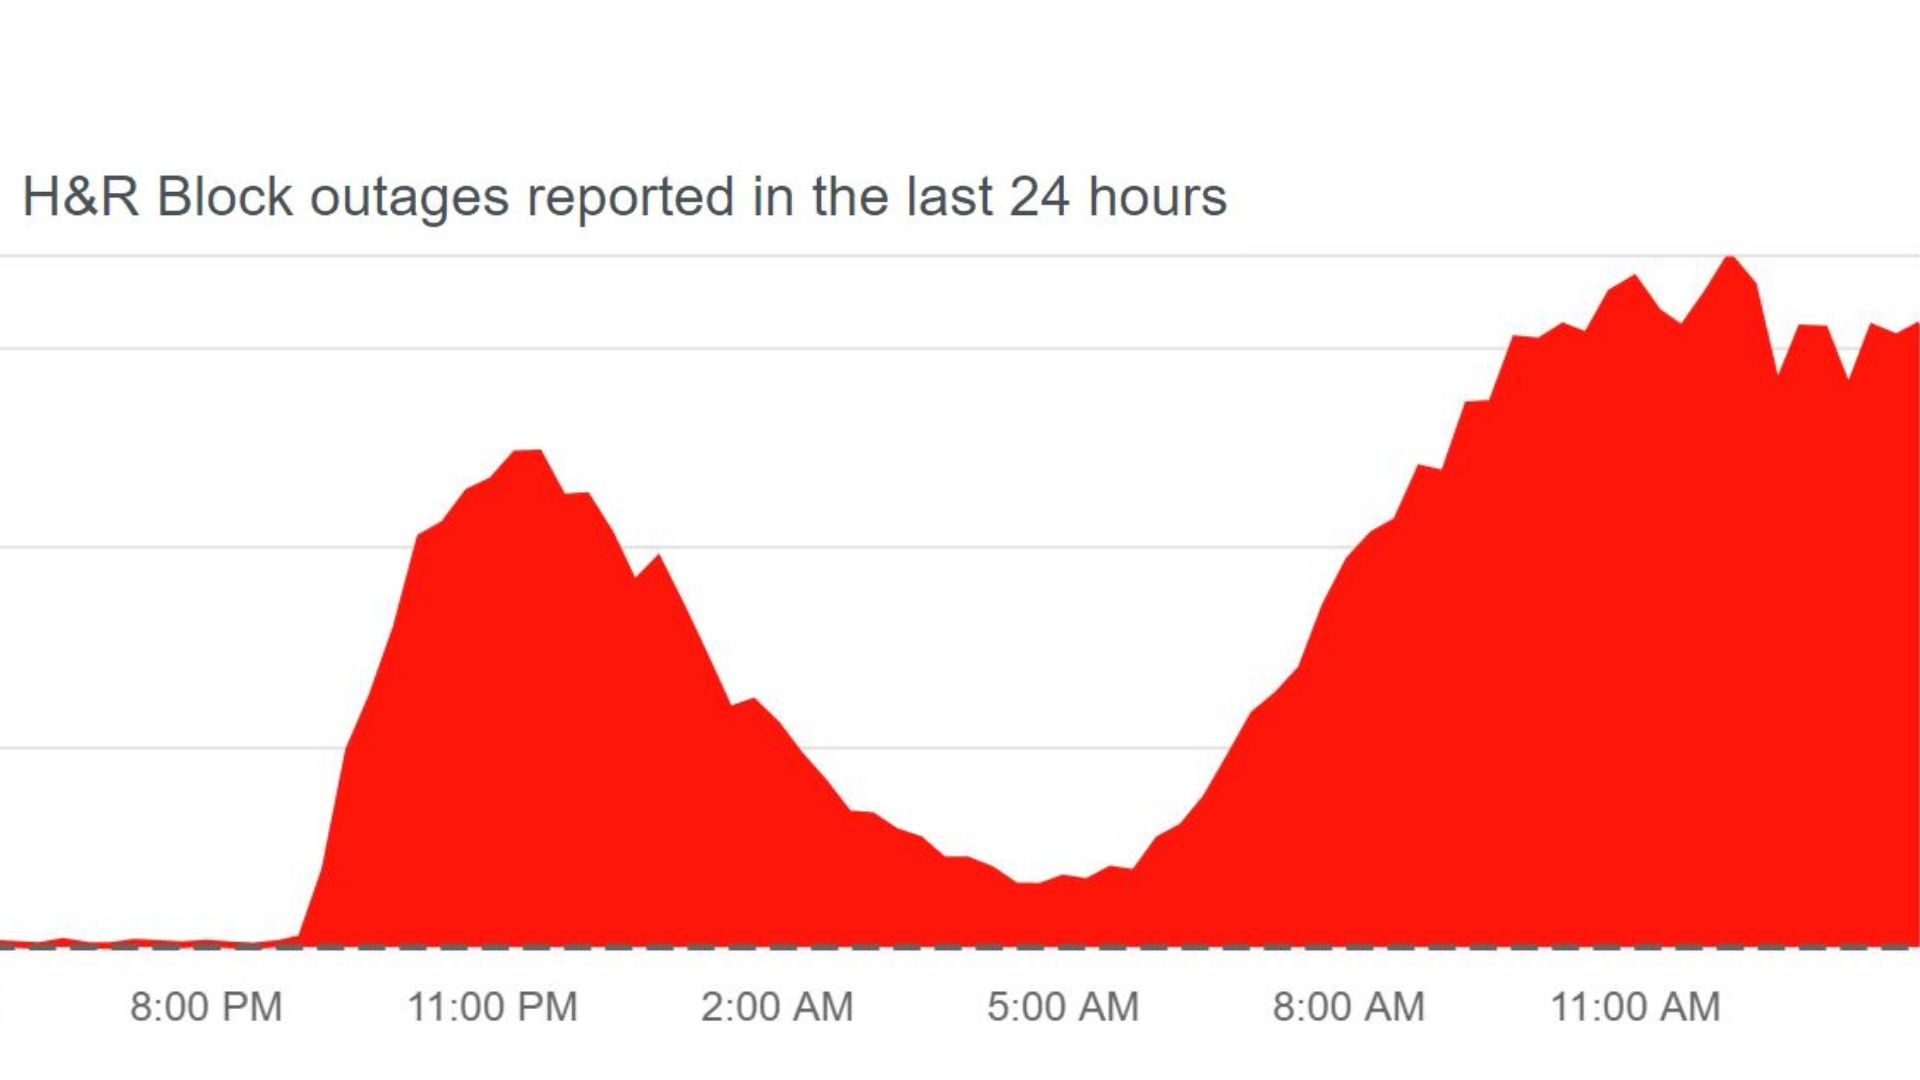 H&R Block server outage shows up on Downdetector